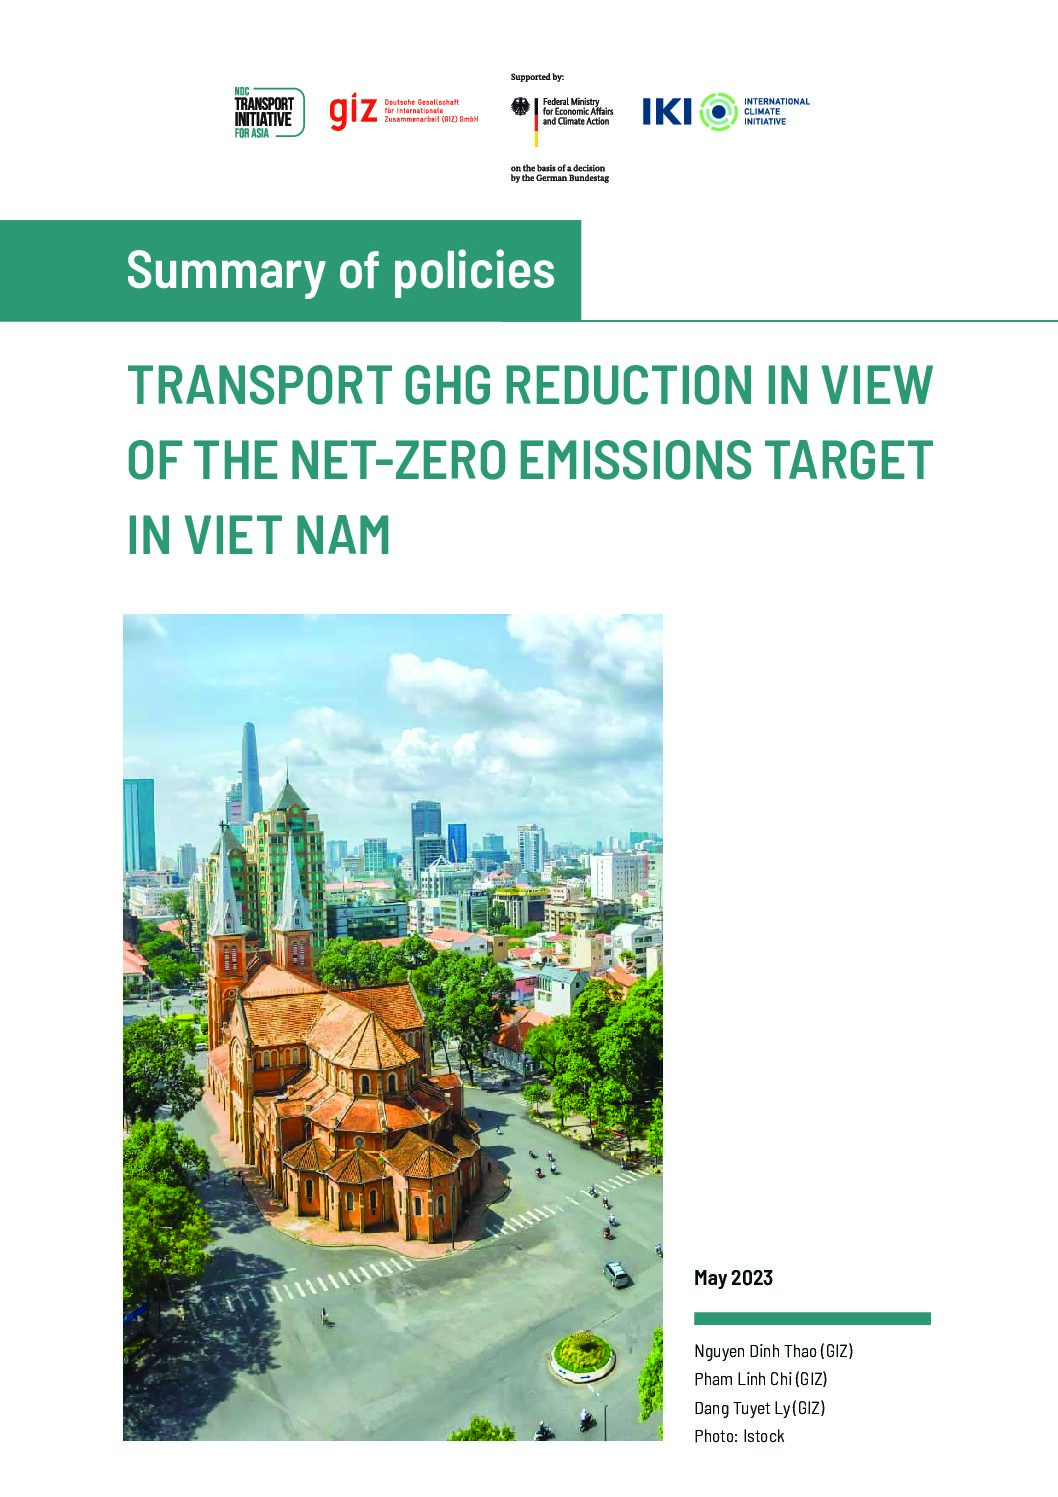 Summary of Policies: Transport GHG Reduction in View of the Net-Zero Emissions Target in Viet Nam